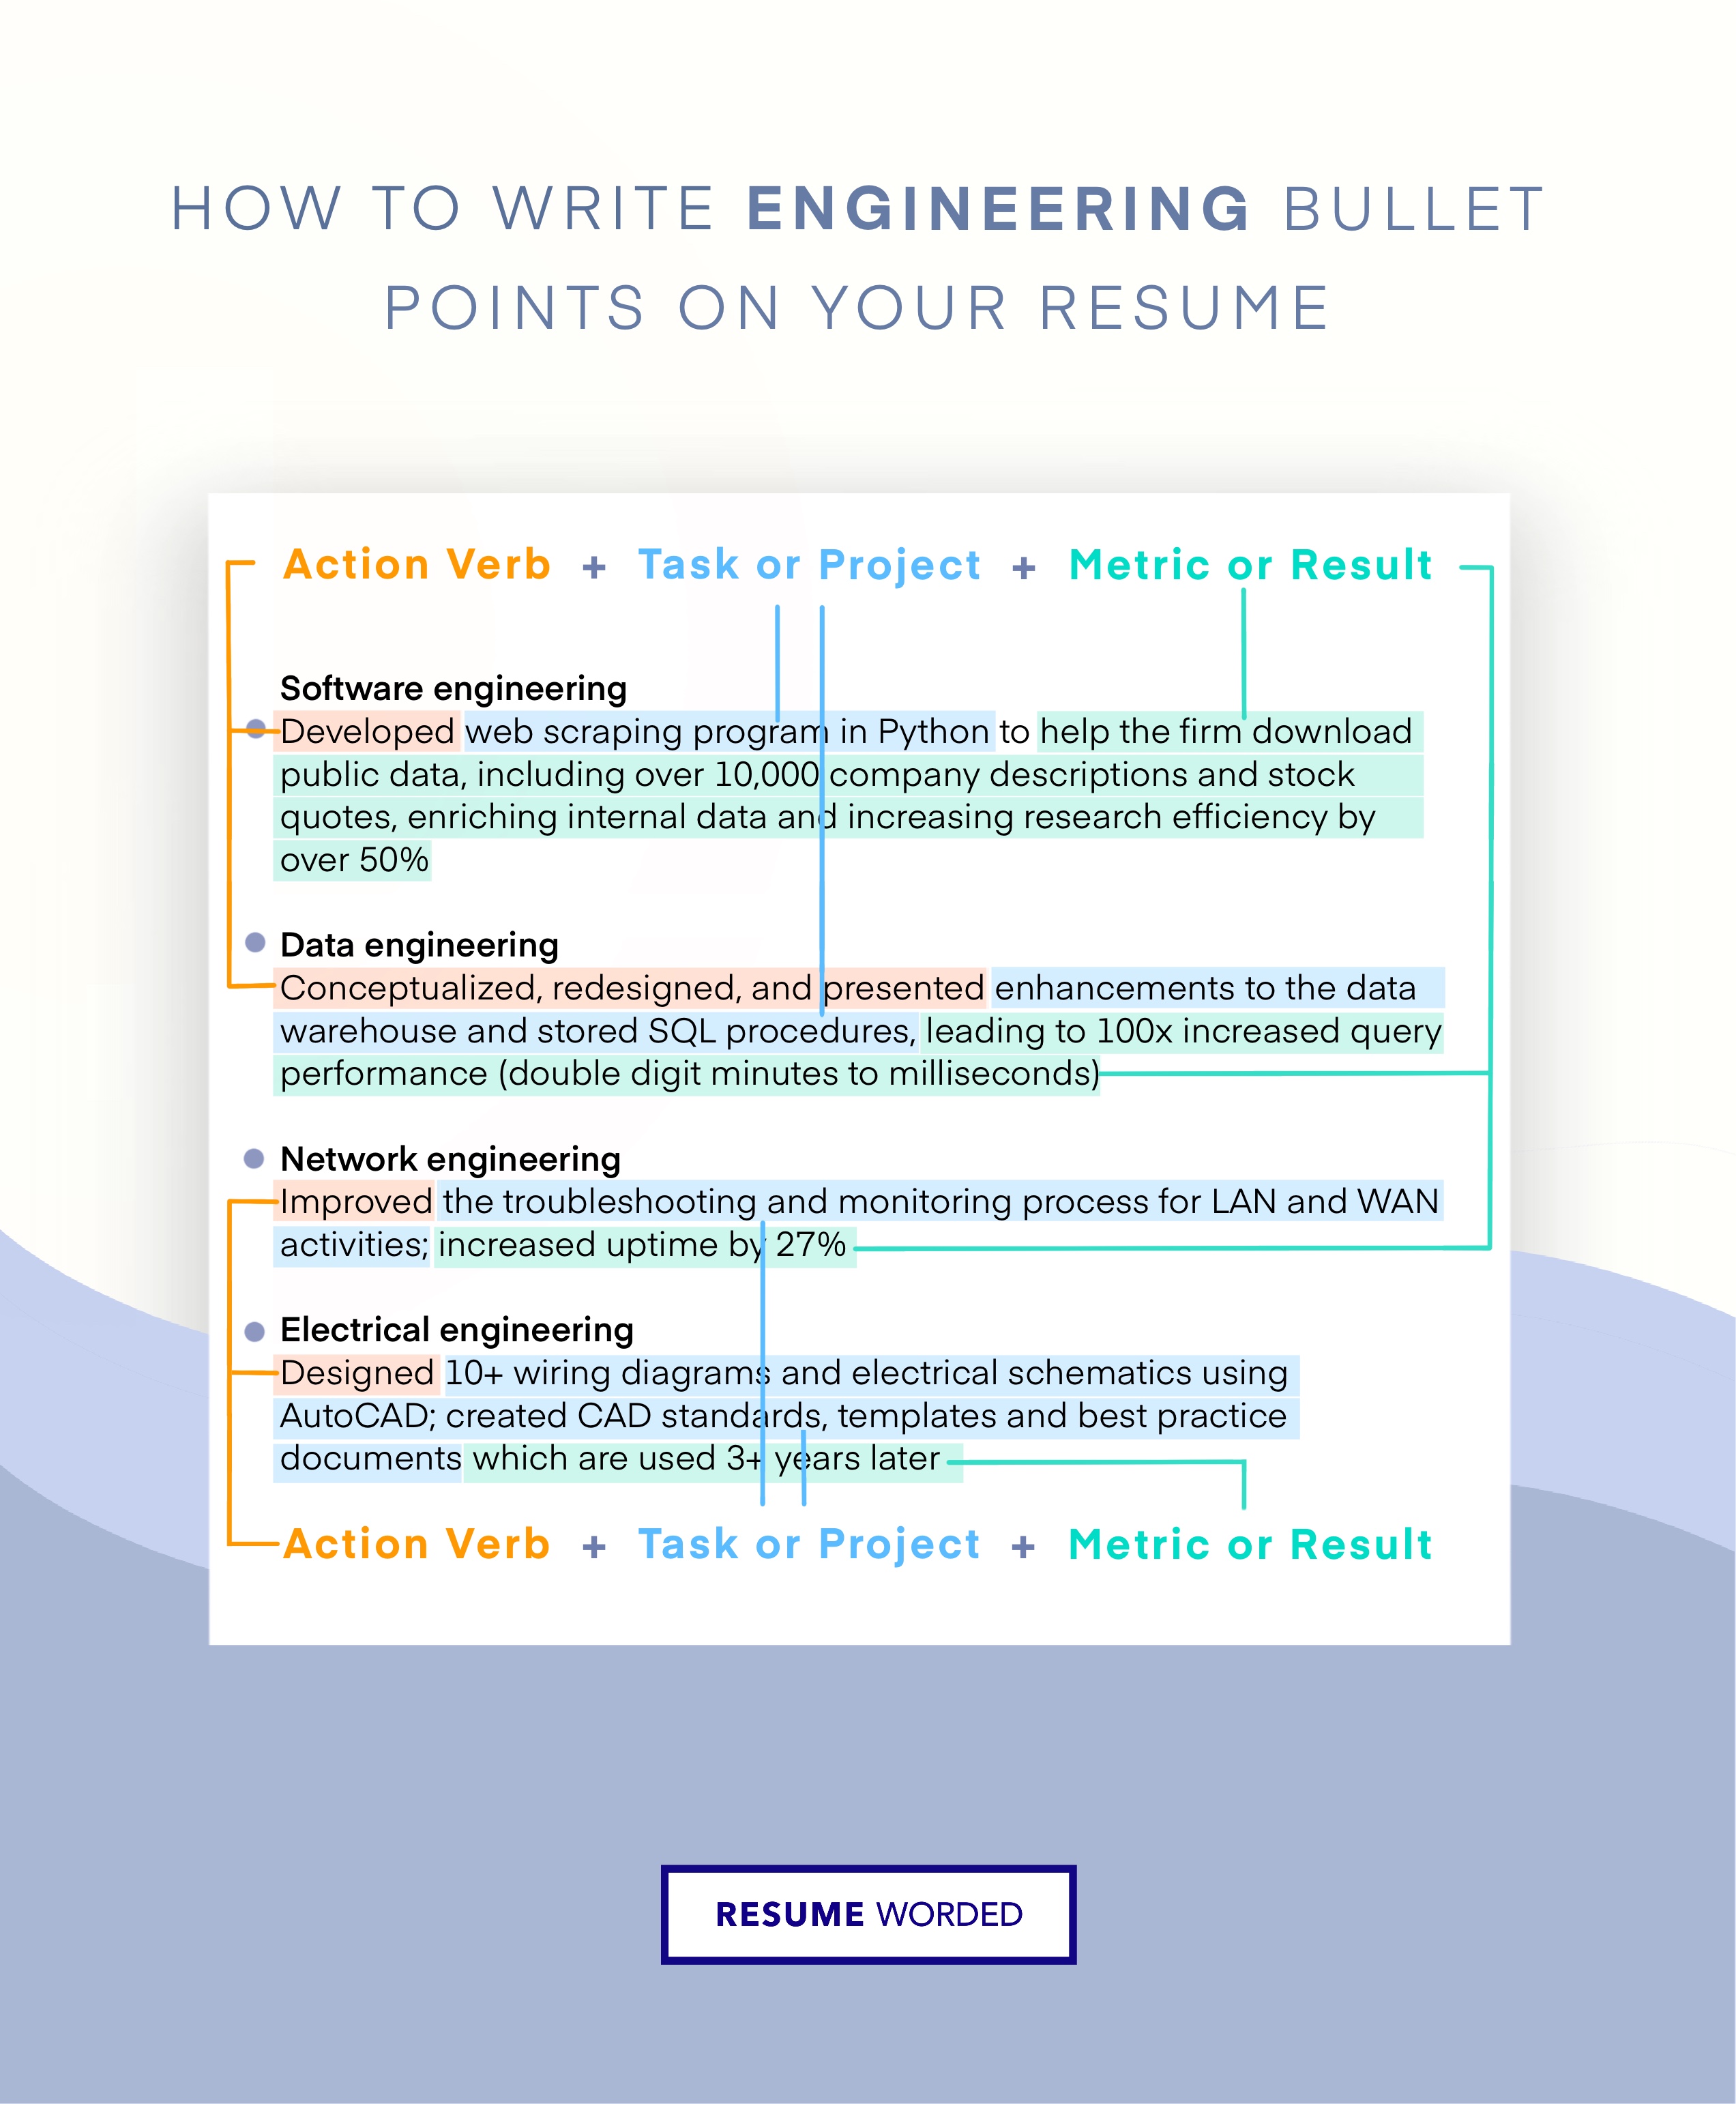 Emphasis on quality engineering skills - Manufacturing Quality Engineer Resume